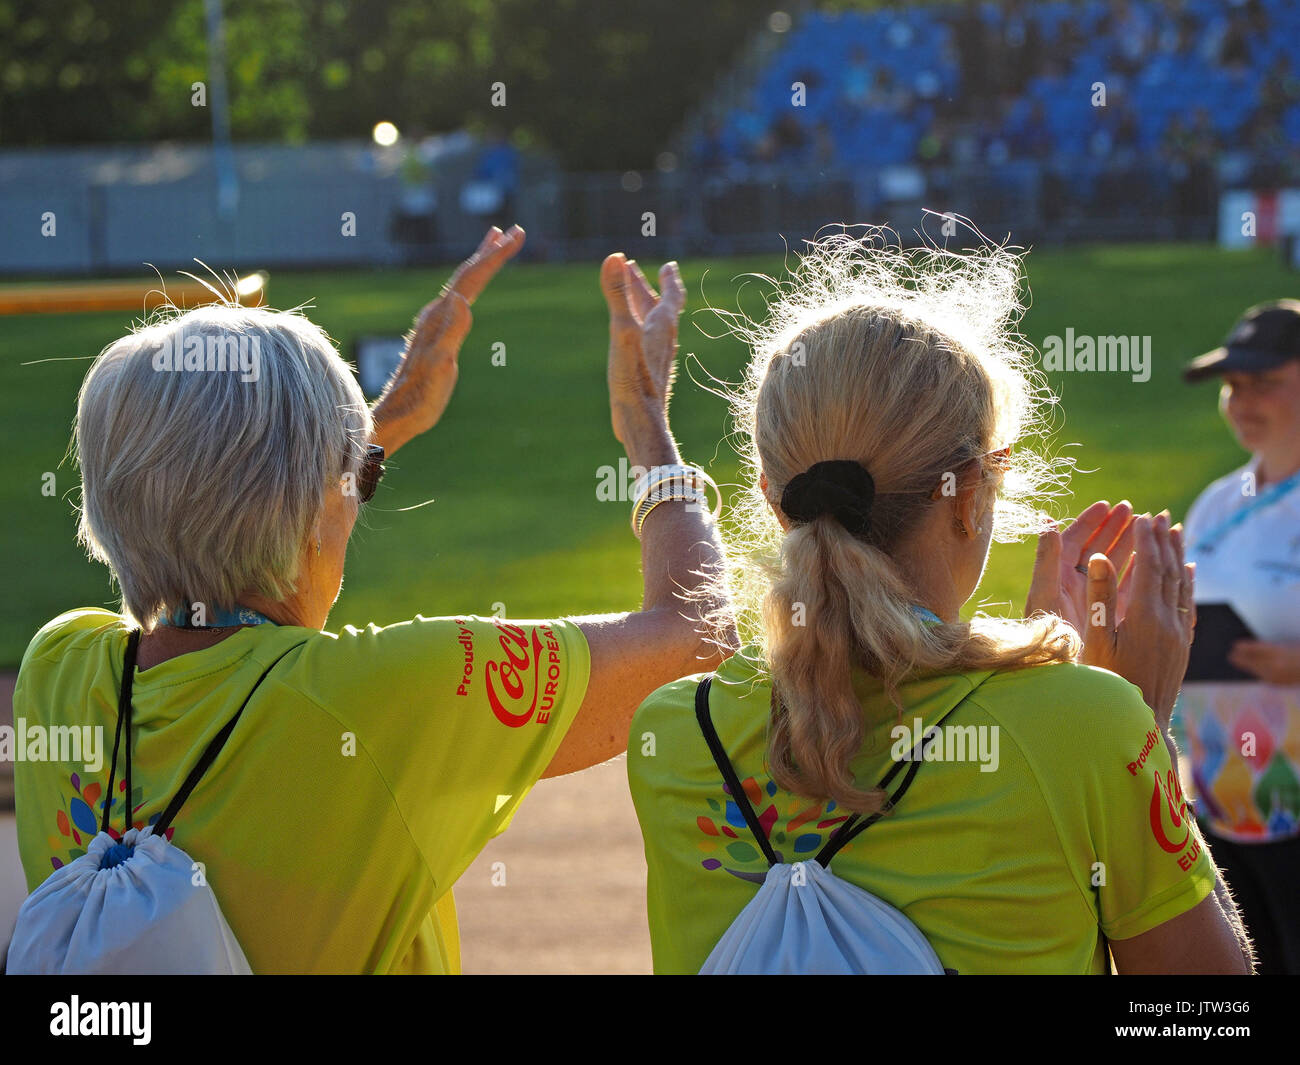 Sheffield, UK. 10th August, 2017. Volunteers applaud at the sunshine at Special Olympics National Games in Sheffield Credit: Steve Holroyd/Alamy Live News Stock Photo